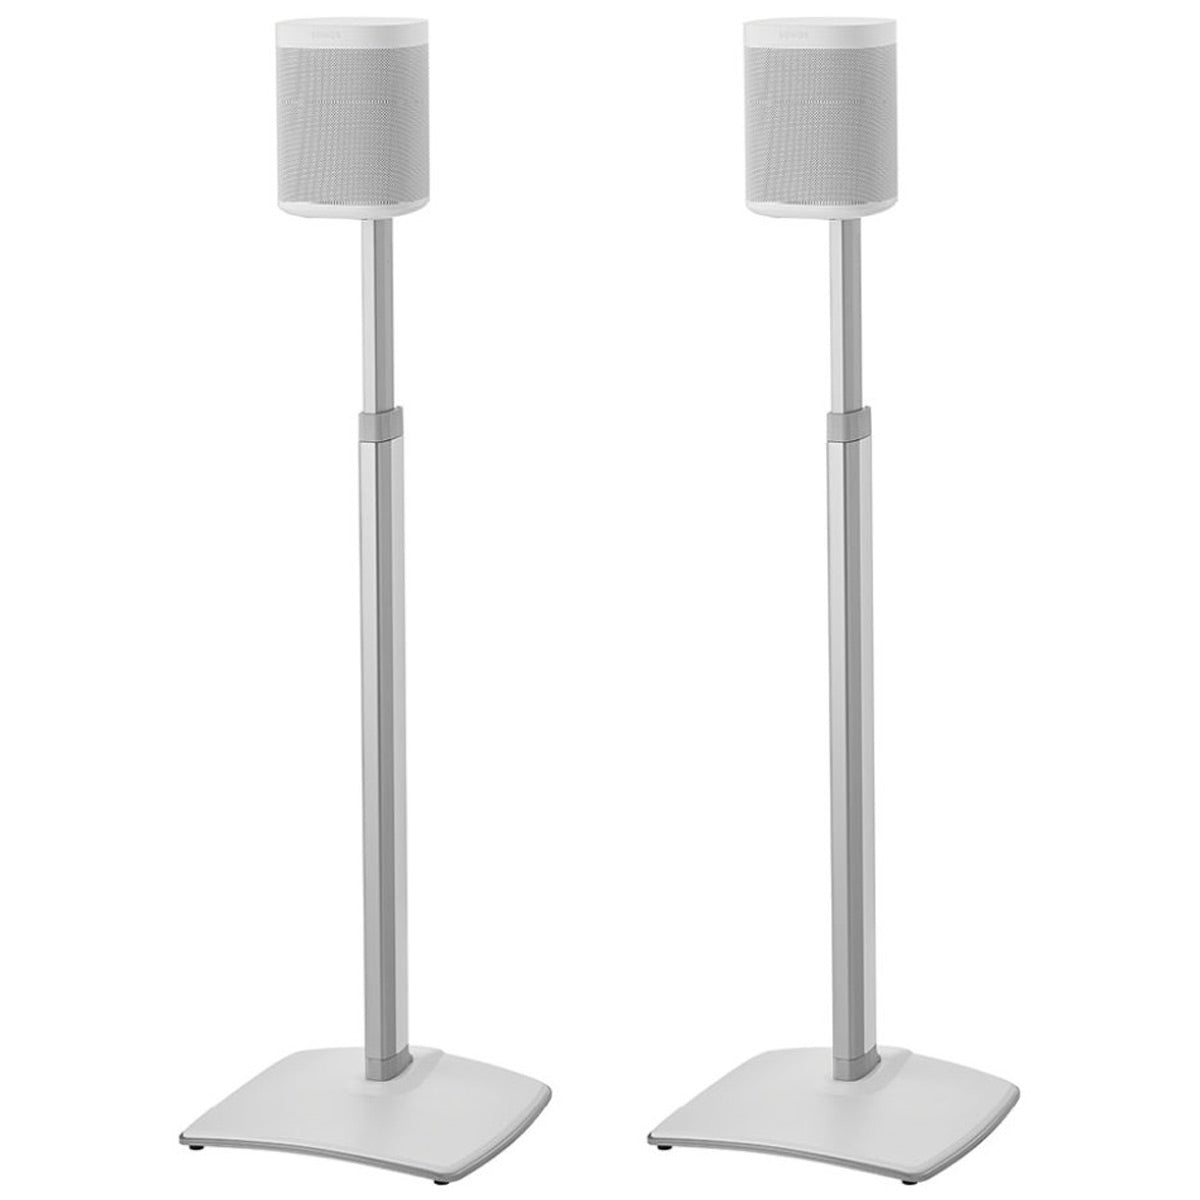 Sanus WSSA2 Height-Adjustable Wireless Speaker Stands for Sonos ONE, PLAY:1, and PLAY:3 - Pair (White)